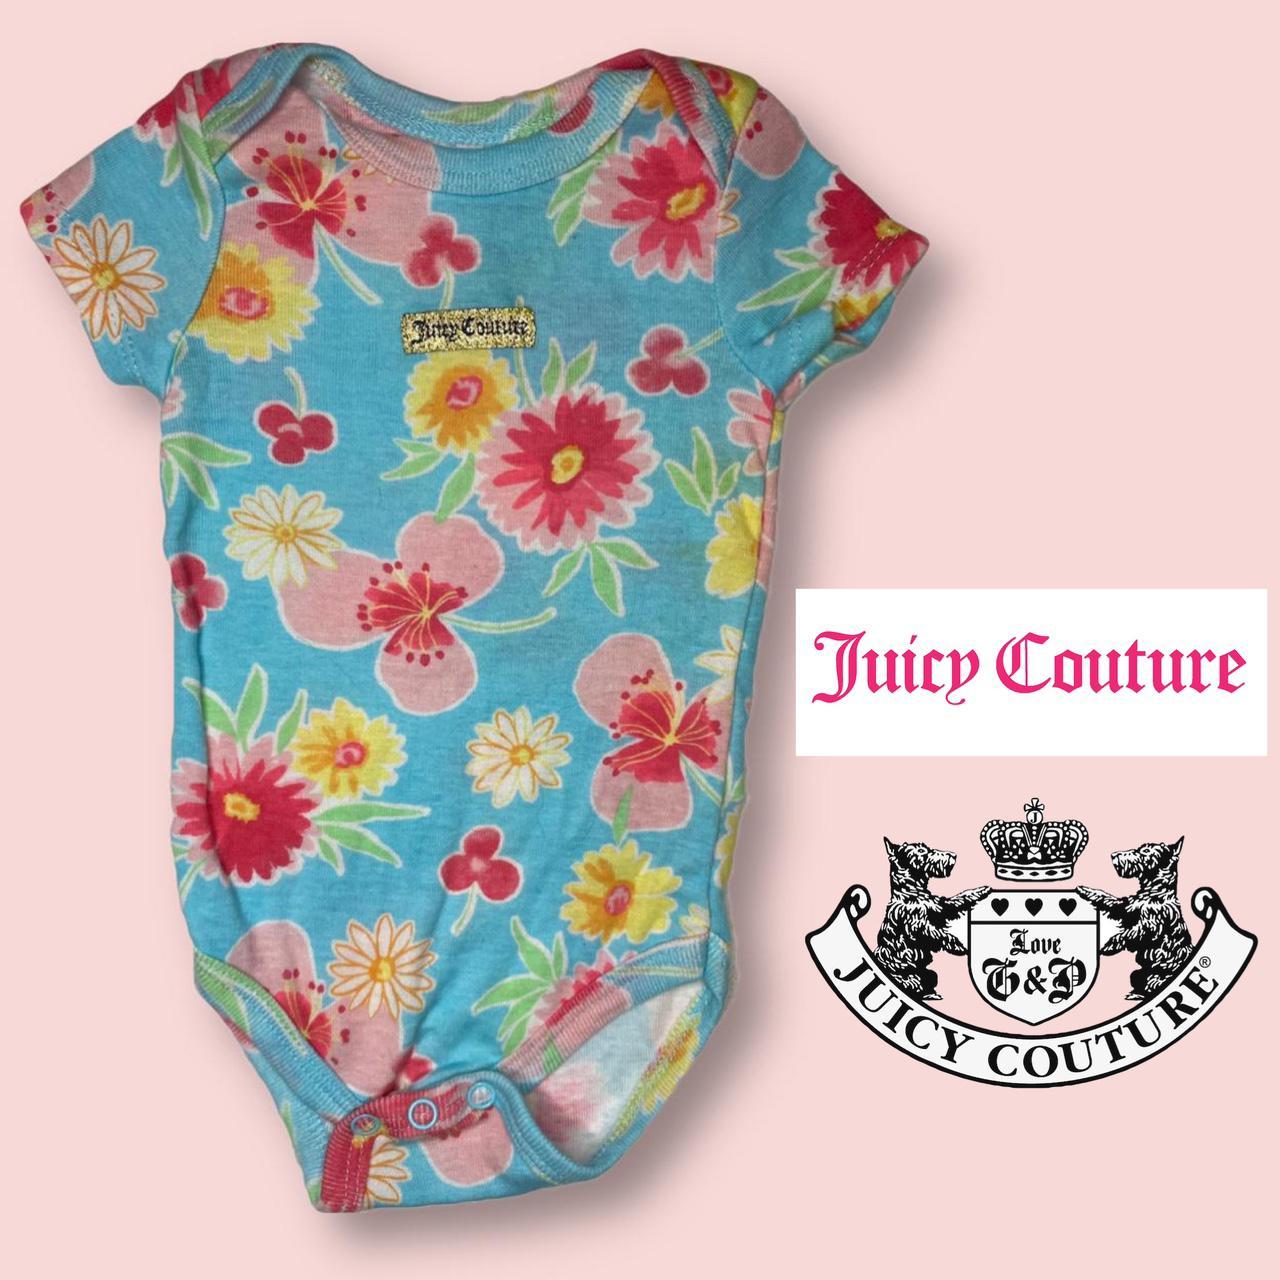 Product Image 1 - Juicy Couture baby onesie 👑
•